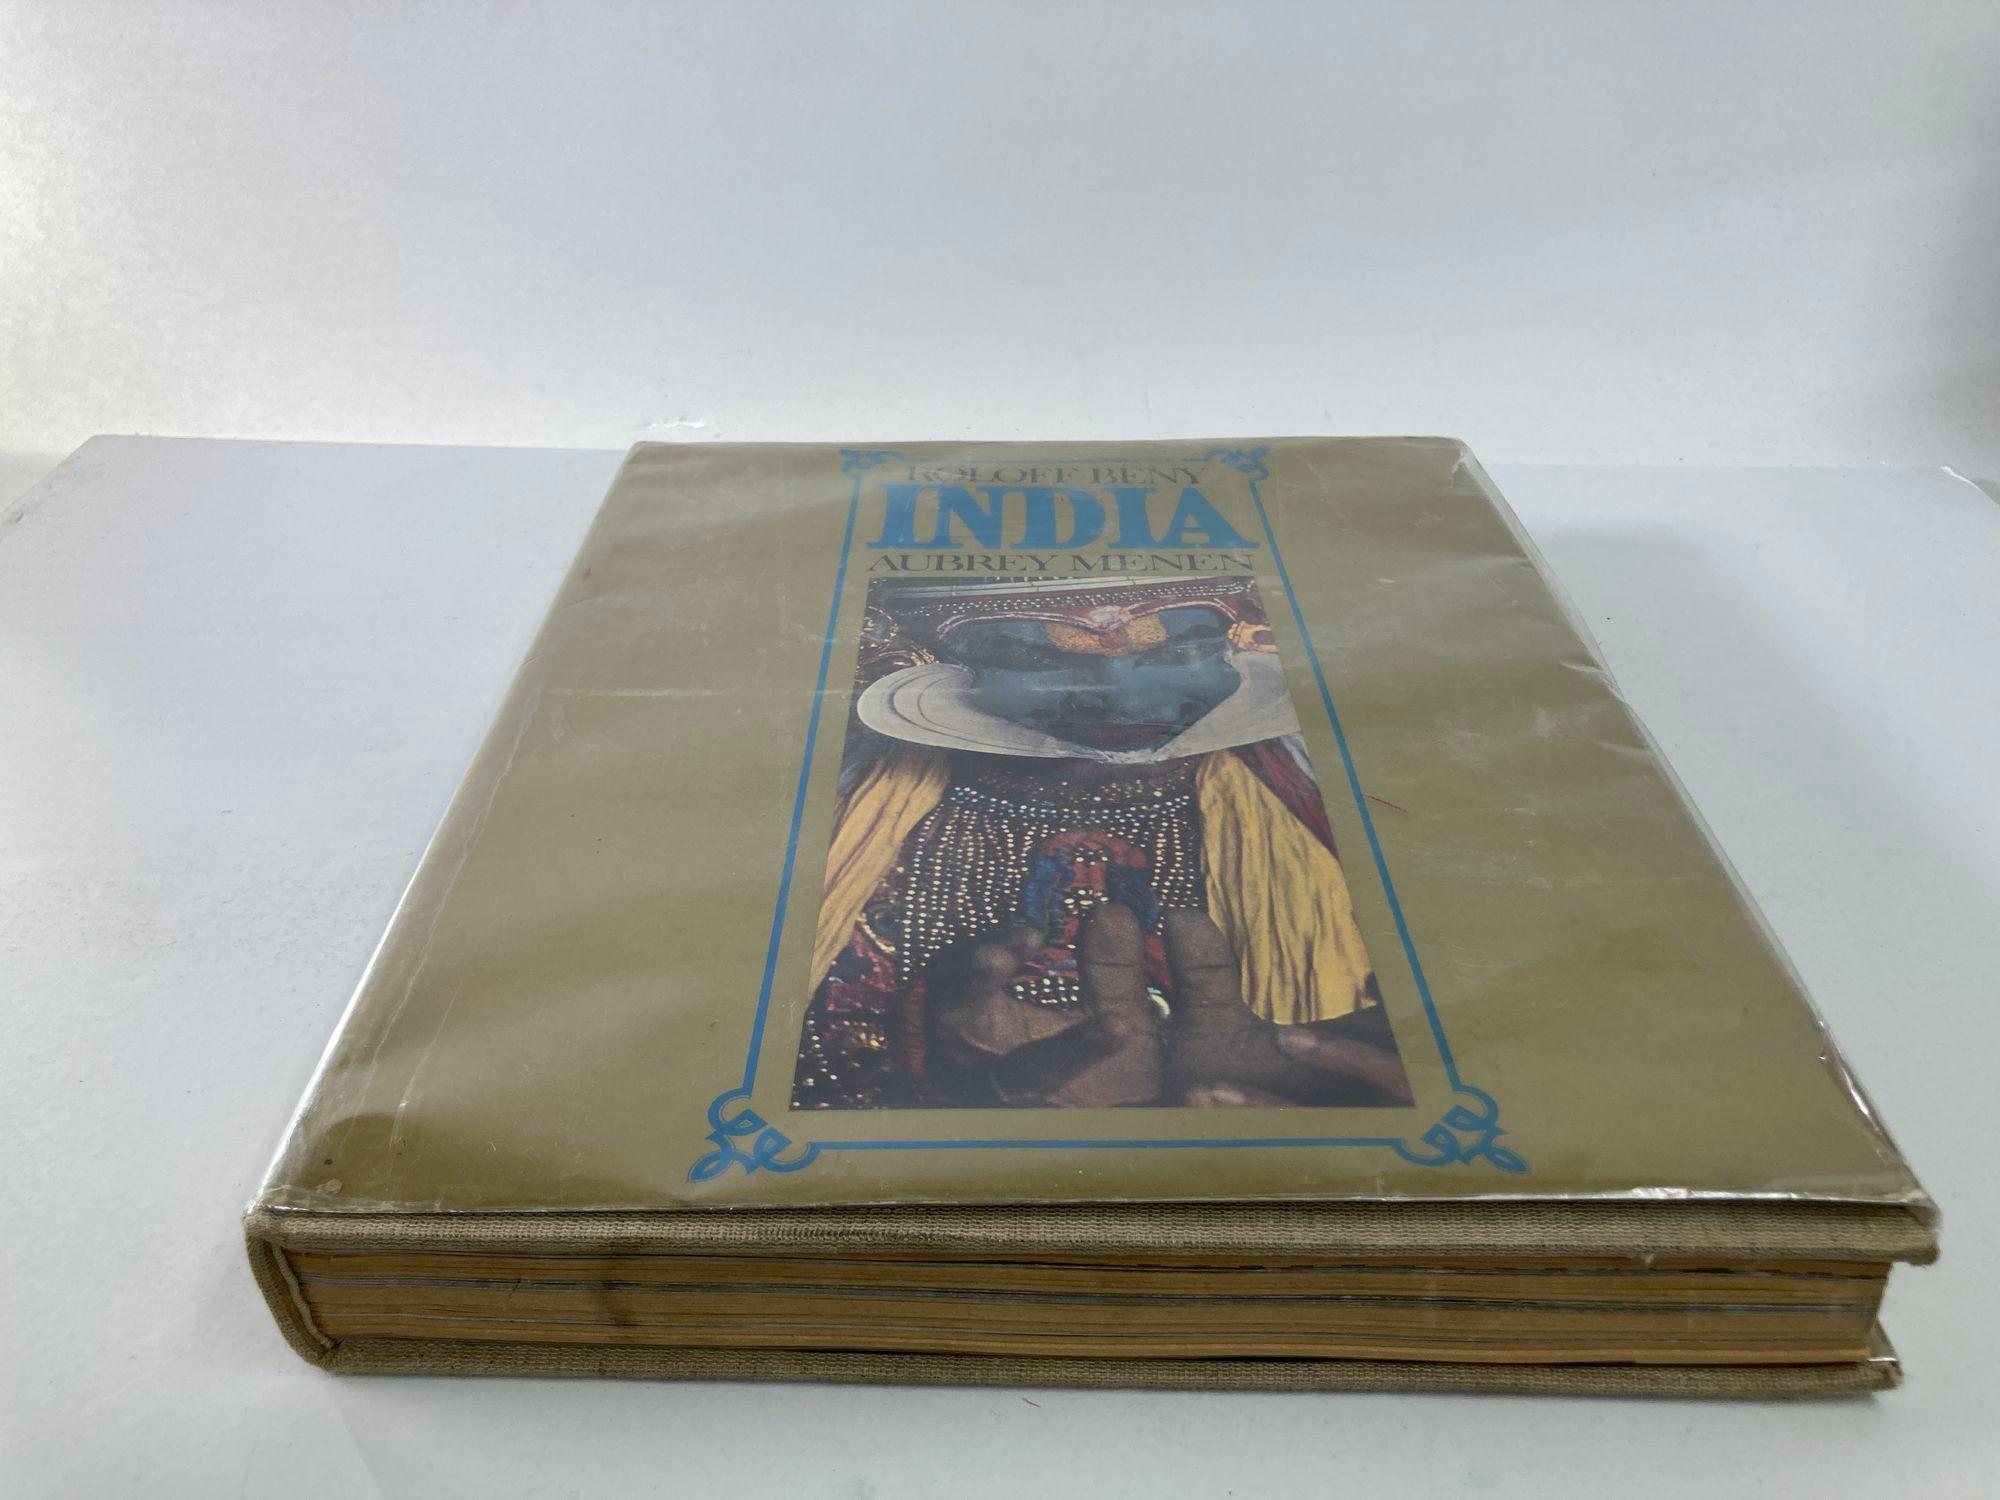 Folk Art India by Beny Rolloff and Aubrey Menen 1st Edition Hardcover Book For Sale